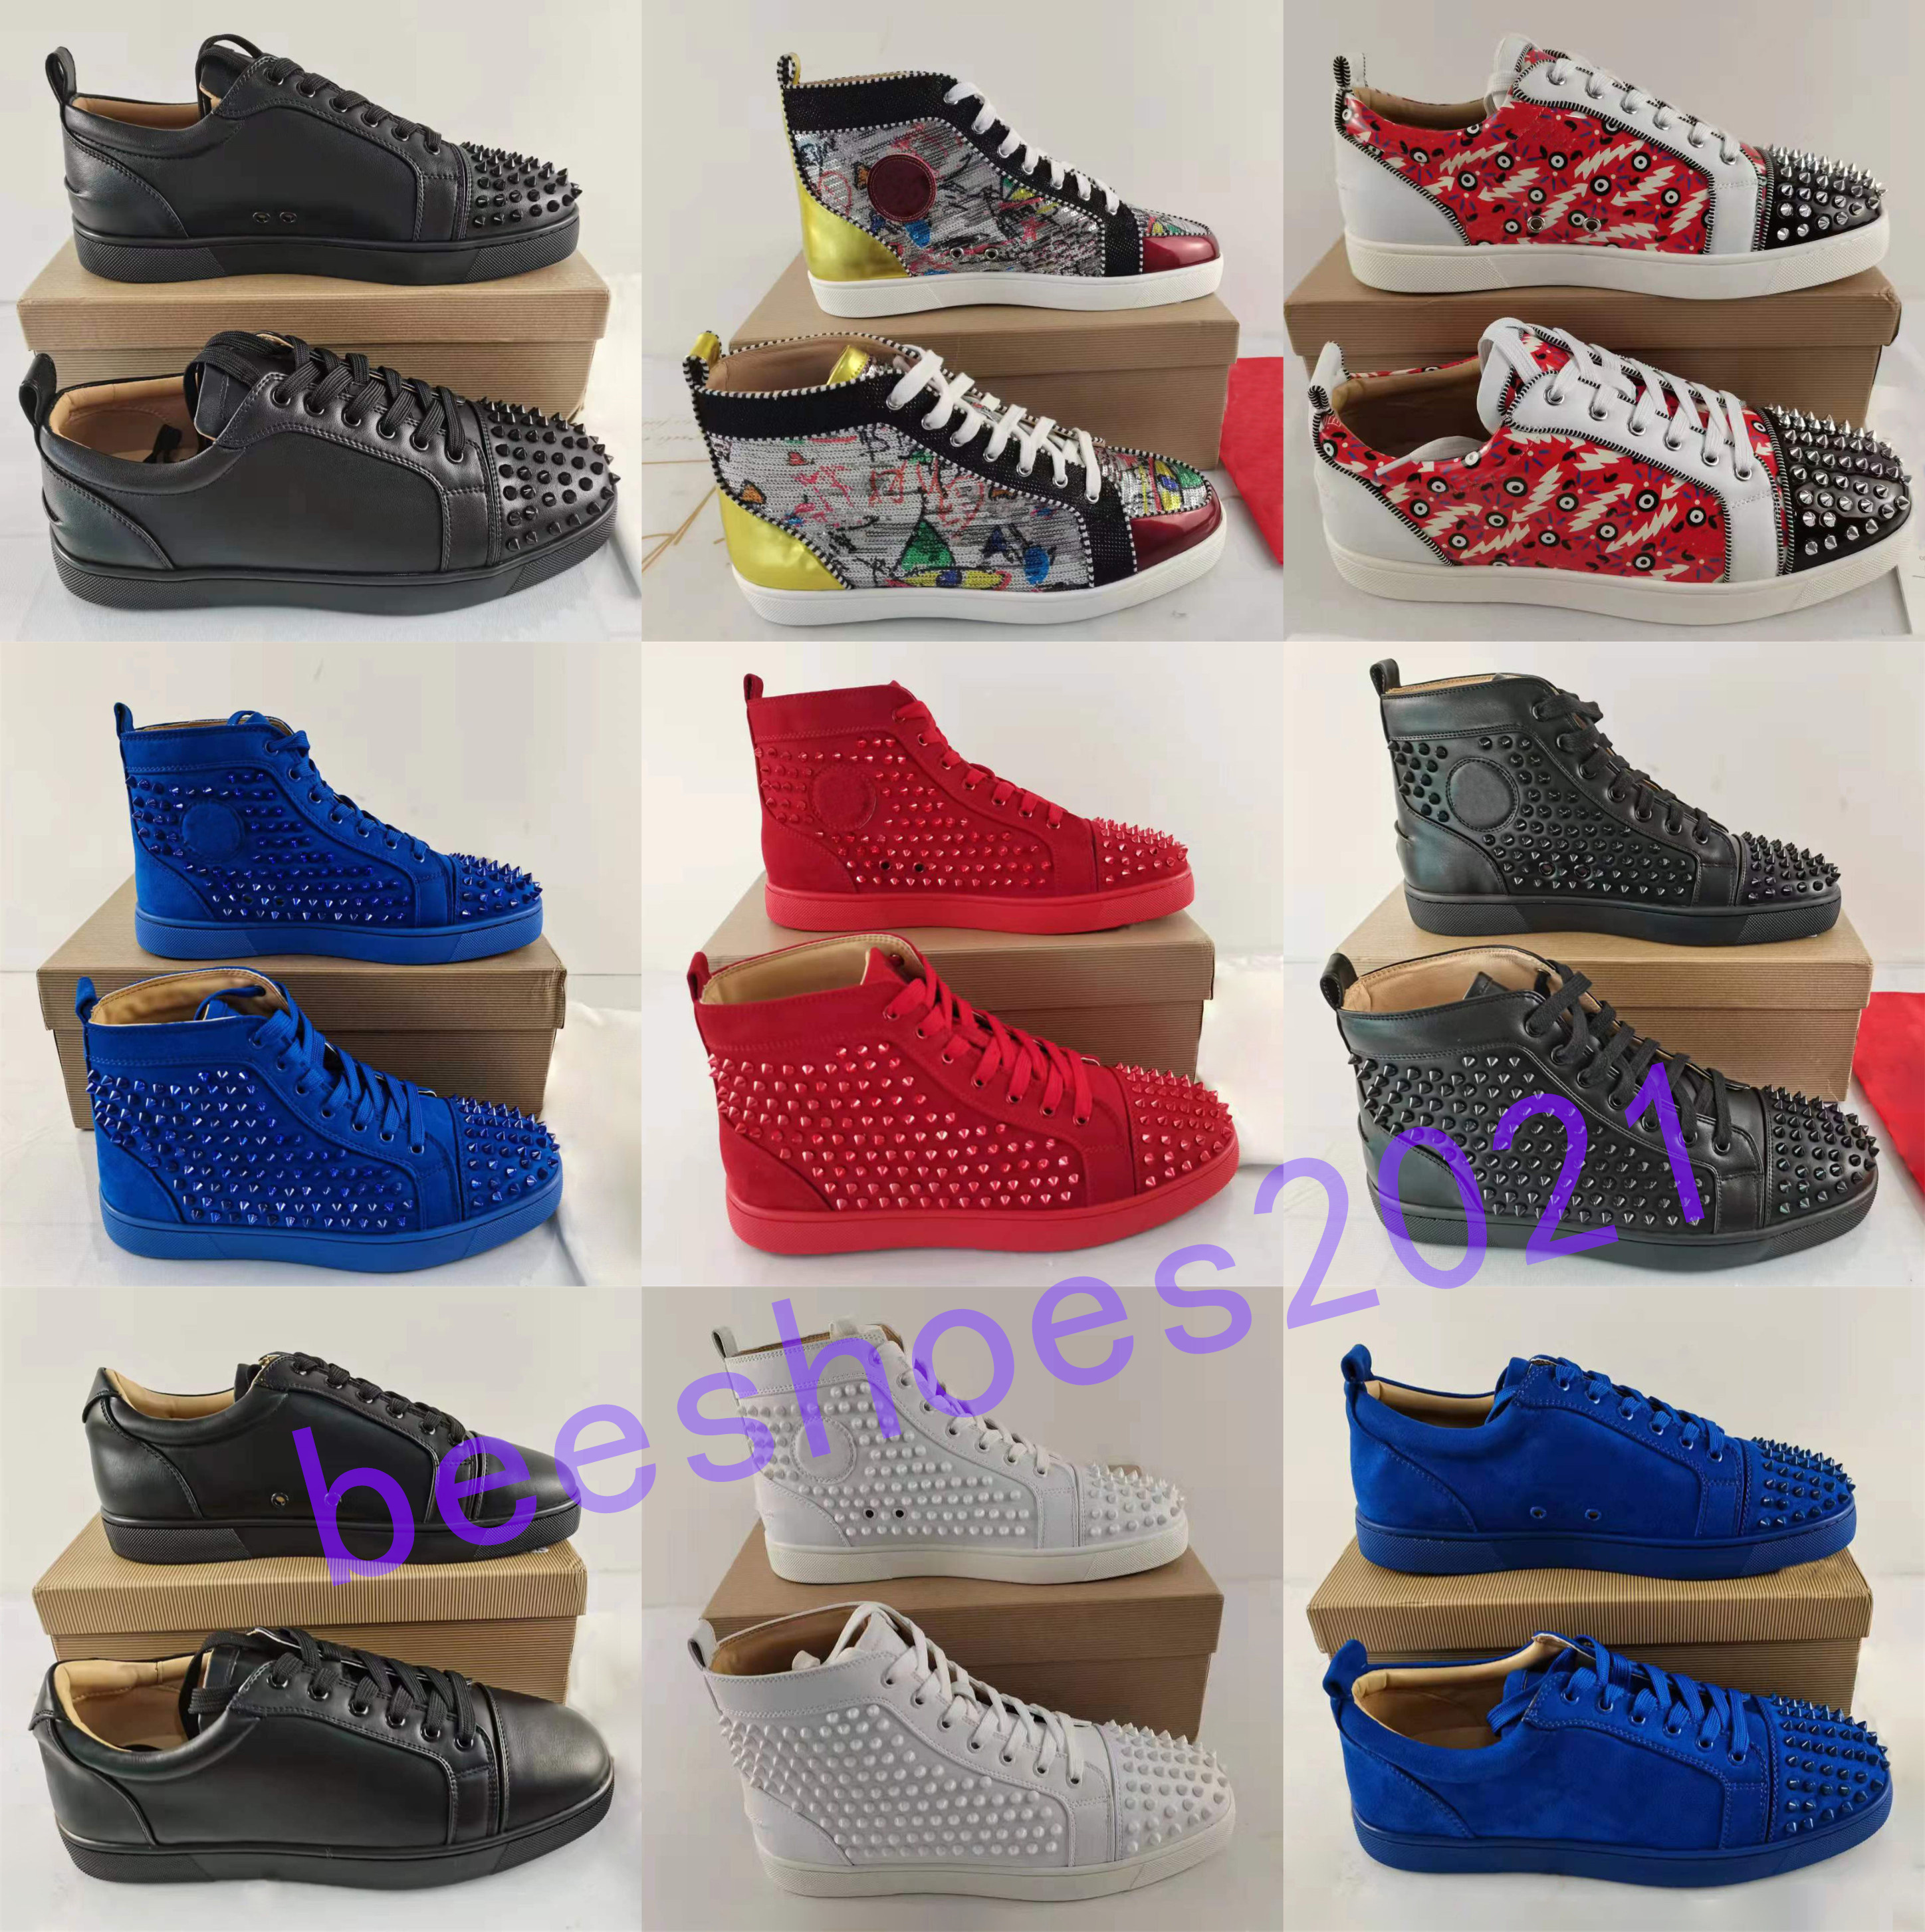 

Mens Casual Shoes Women Outdoor Red Bottoms Shoe Studded Spikes Loafers Sneakers Suede Leather Flats Couples Ttrainers Des Chaussures B10, Shoelaces